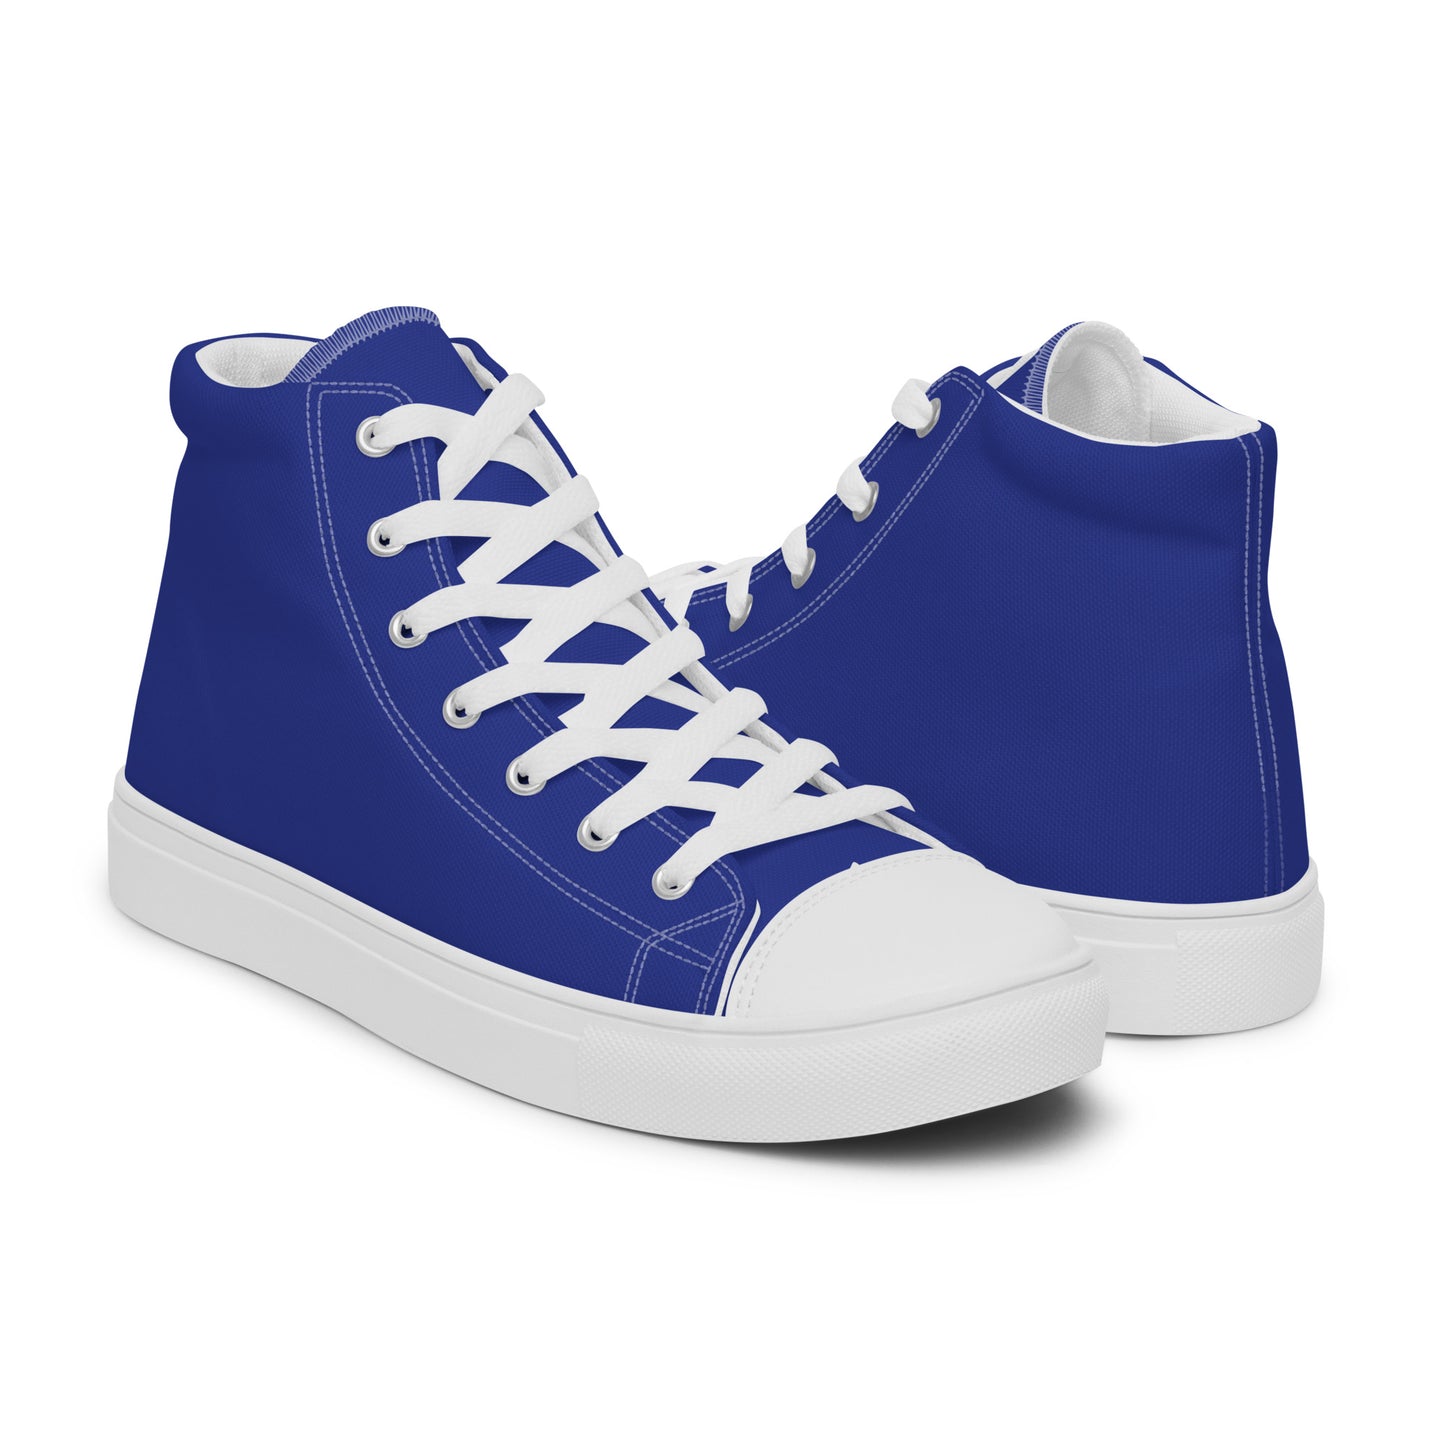 Basic Blue - Sustainably Made Men's High Top Canvas Shoes